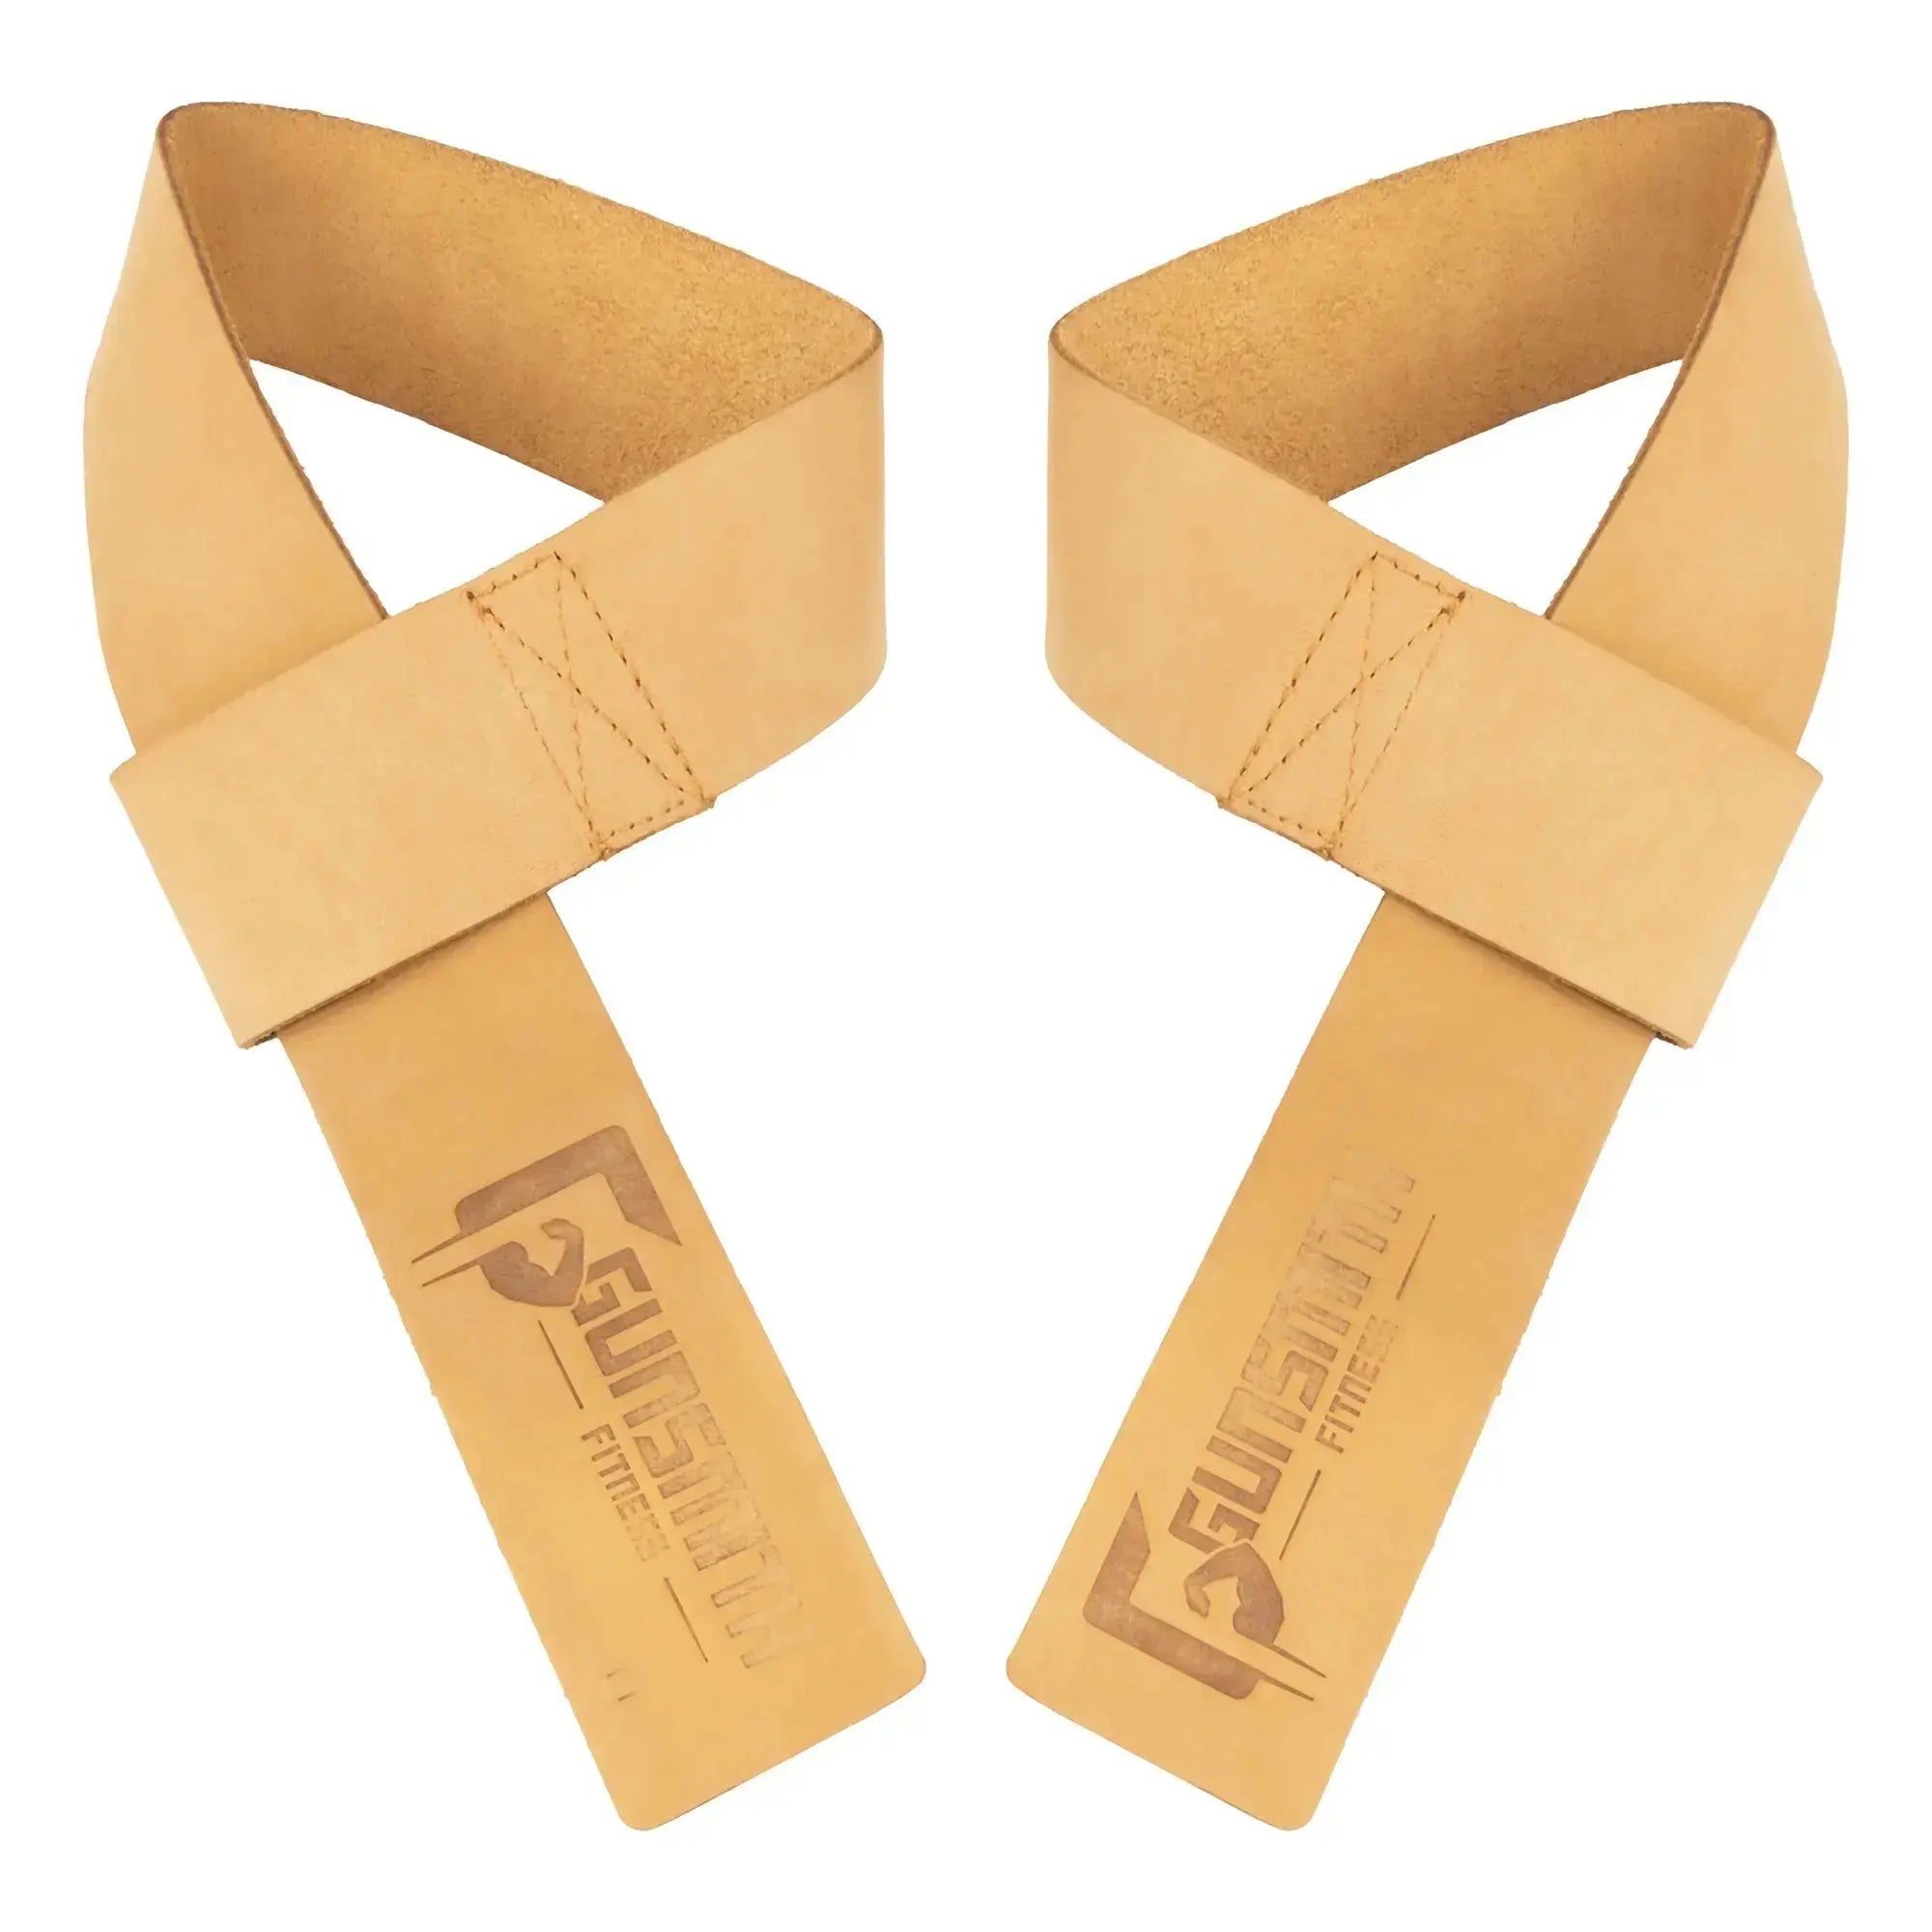 Premium 2 inch/5cm Wide Genuine Leather Weight Lifting Straps - Gunsmith Fitness